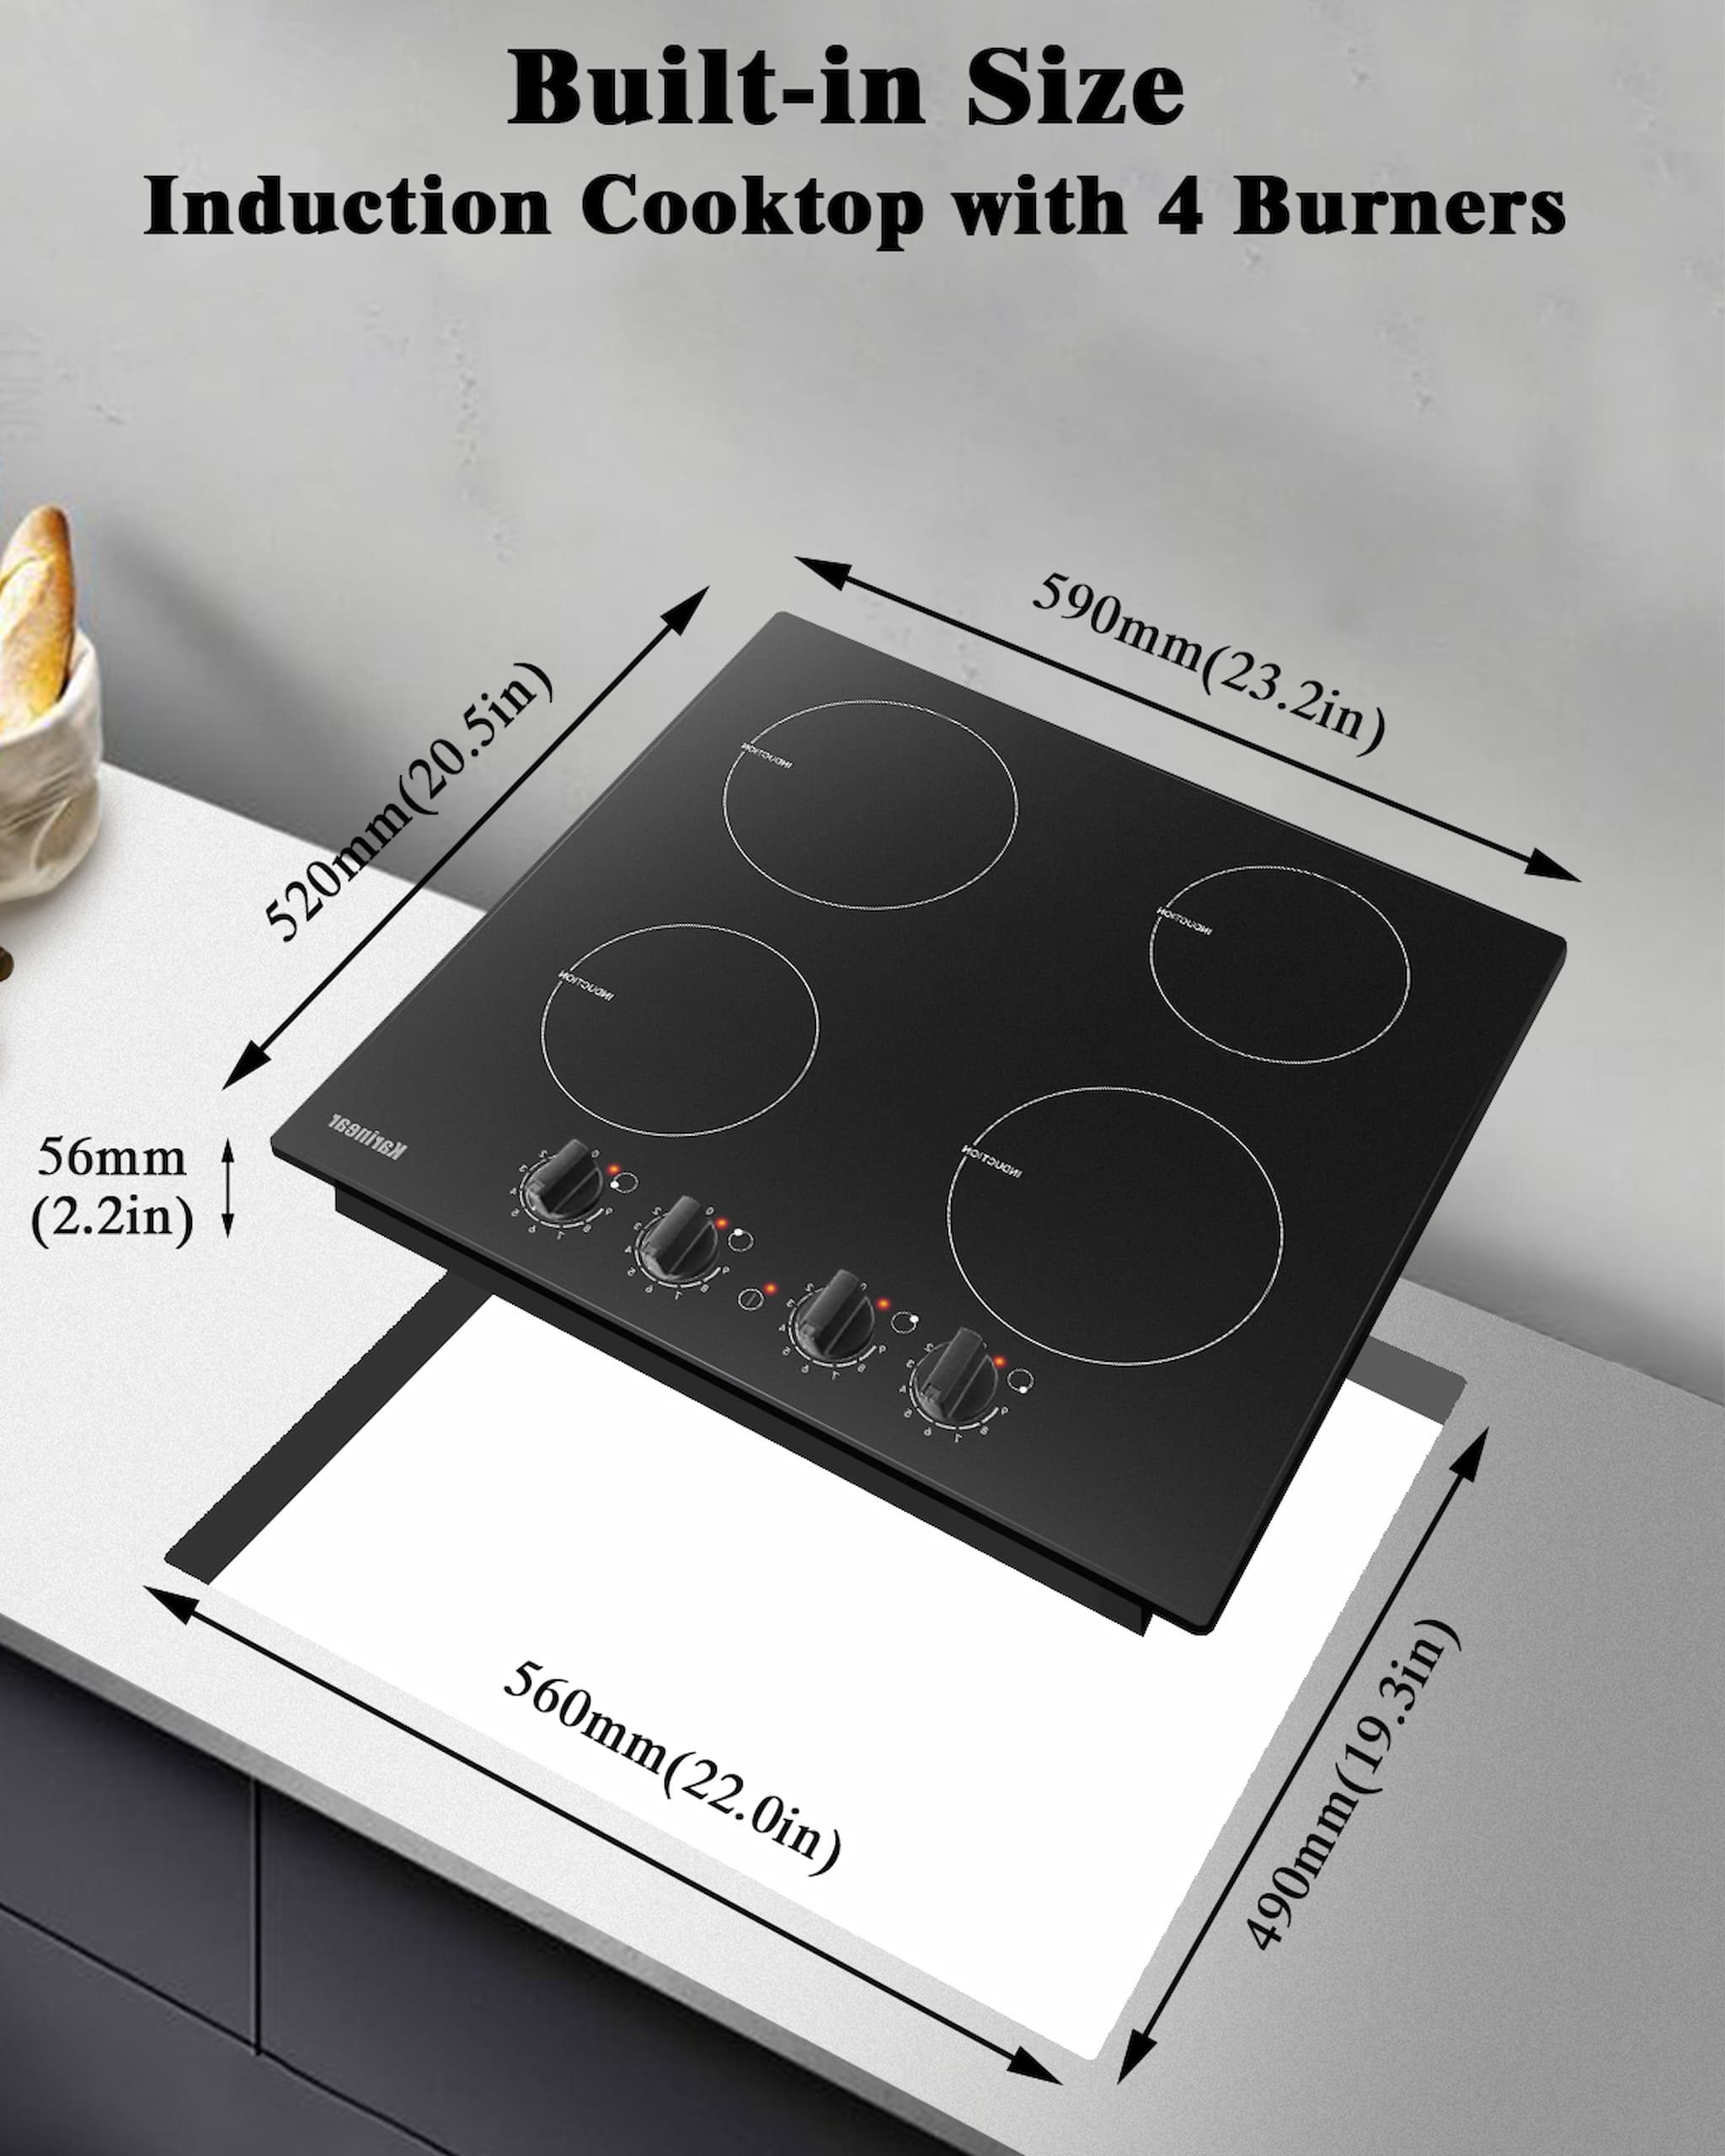 Karinear induction hob 60 cm, 7000W, 4-zone built-in hob, induction hob 4 plates with button control, residual heat indicator, 220-240V, no plugs, only single-phase circuit